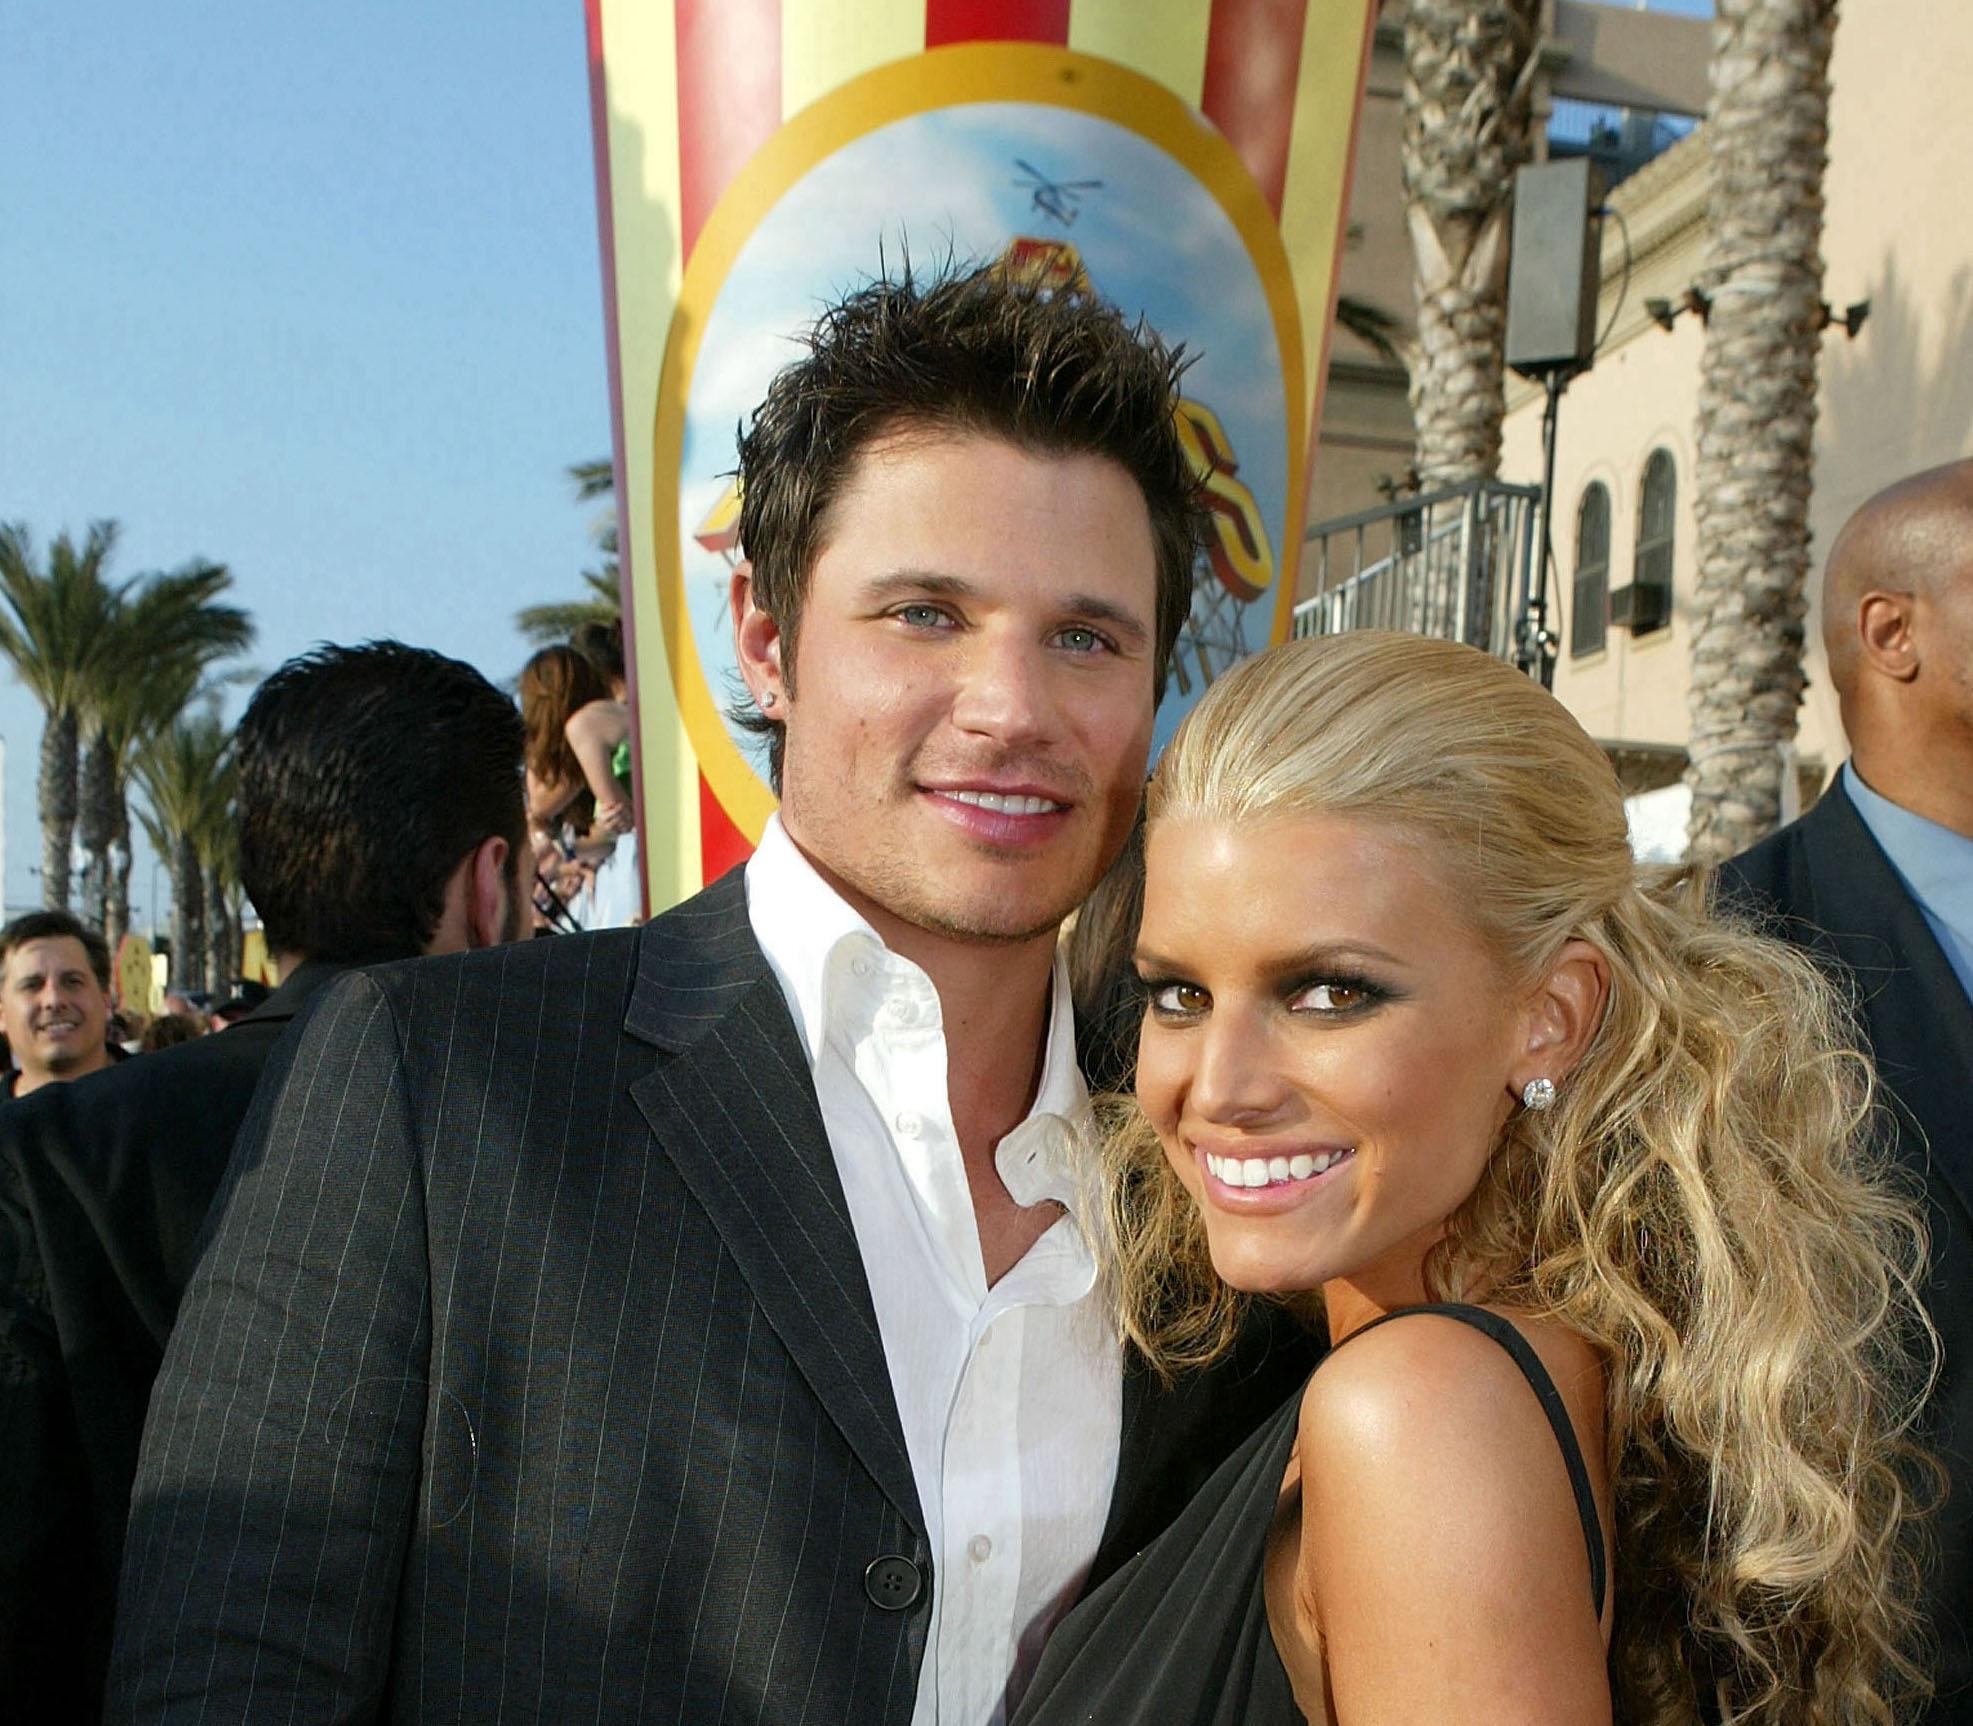 Jessica Simpson details the last time she slept with Nick Lachey